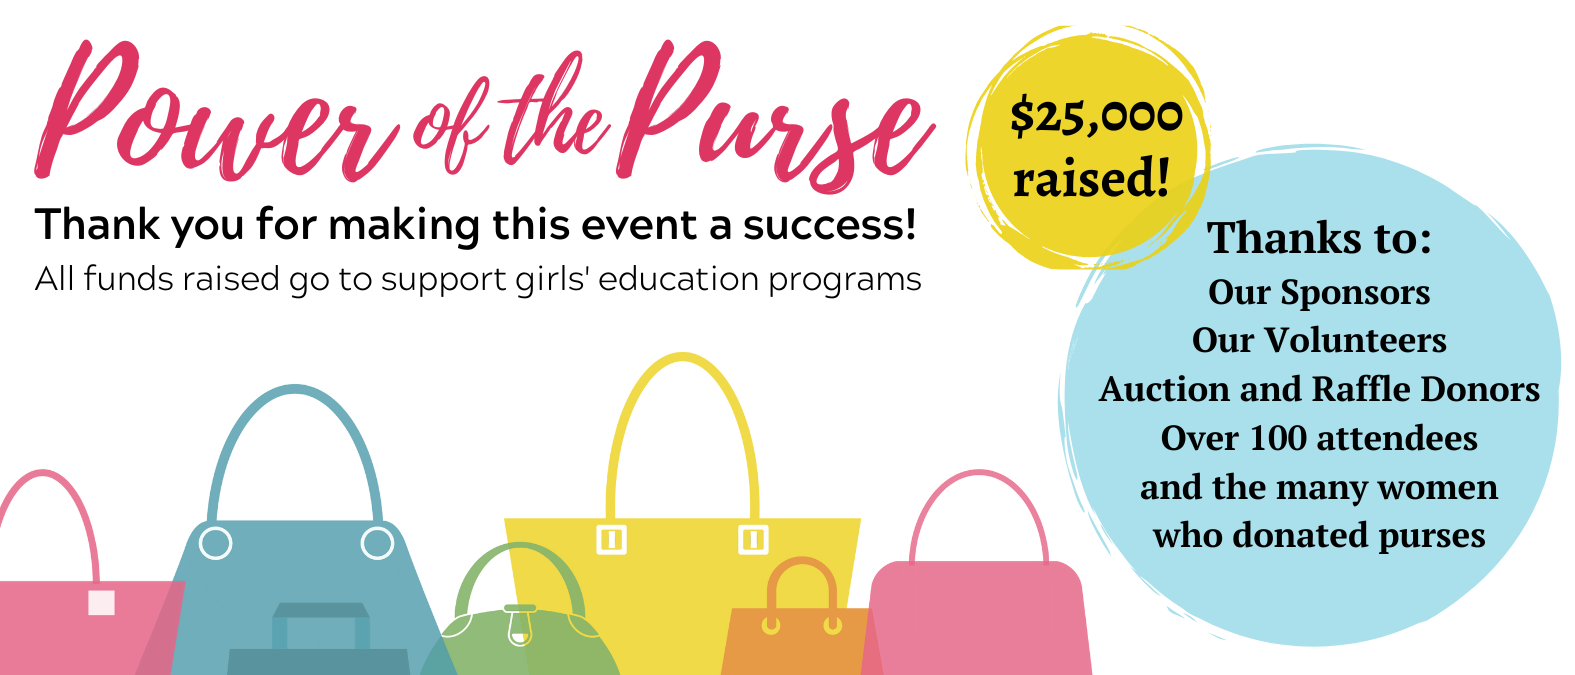 Power of the Purse Luncheon - Women's Fund of Smith County | Together is  Better